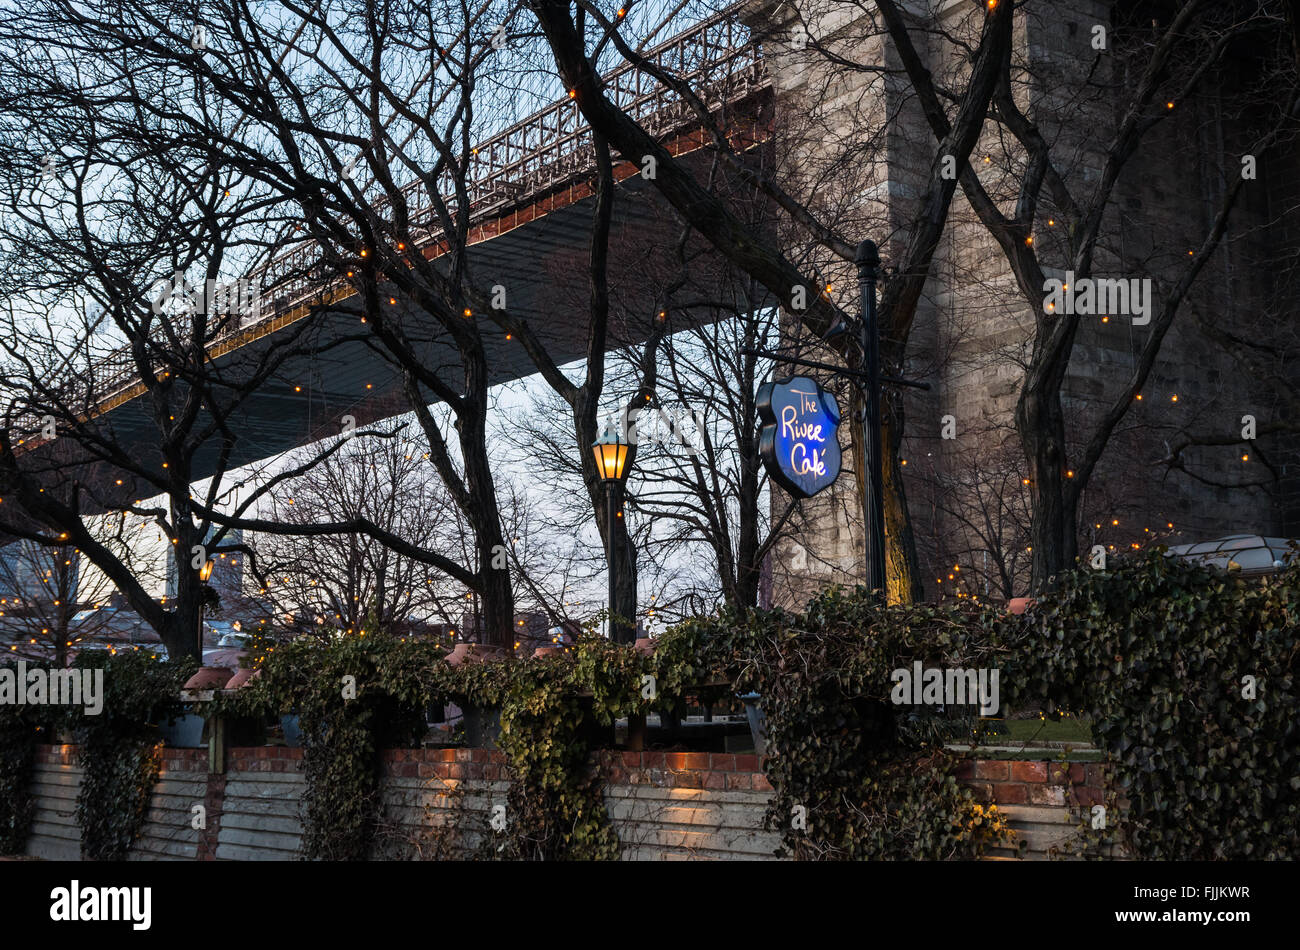 The garden on the River Cafe in DUMBO, Brooklyn sits underneath the Brooklyn Bridge. Stock Photo